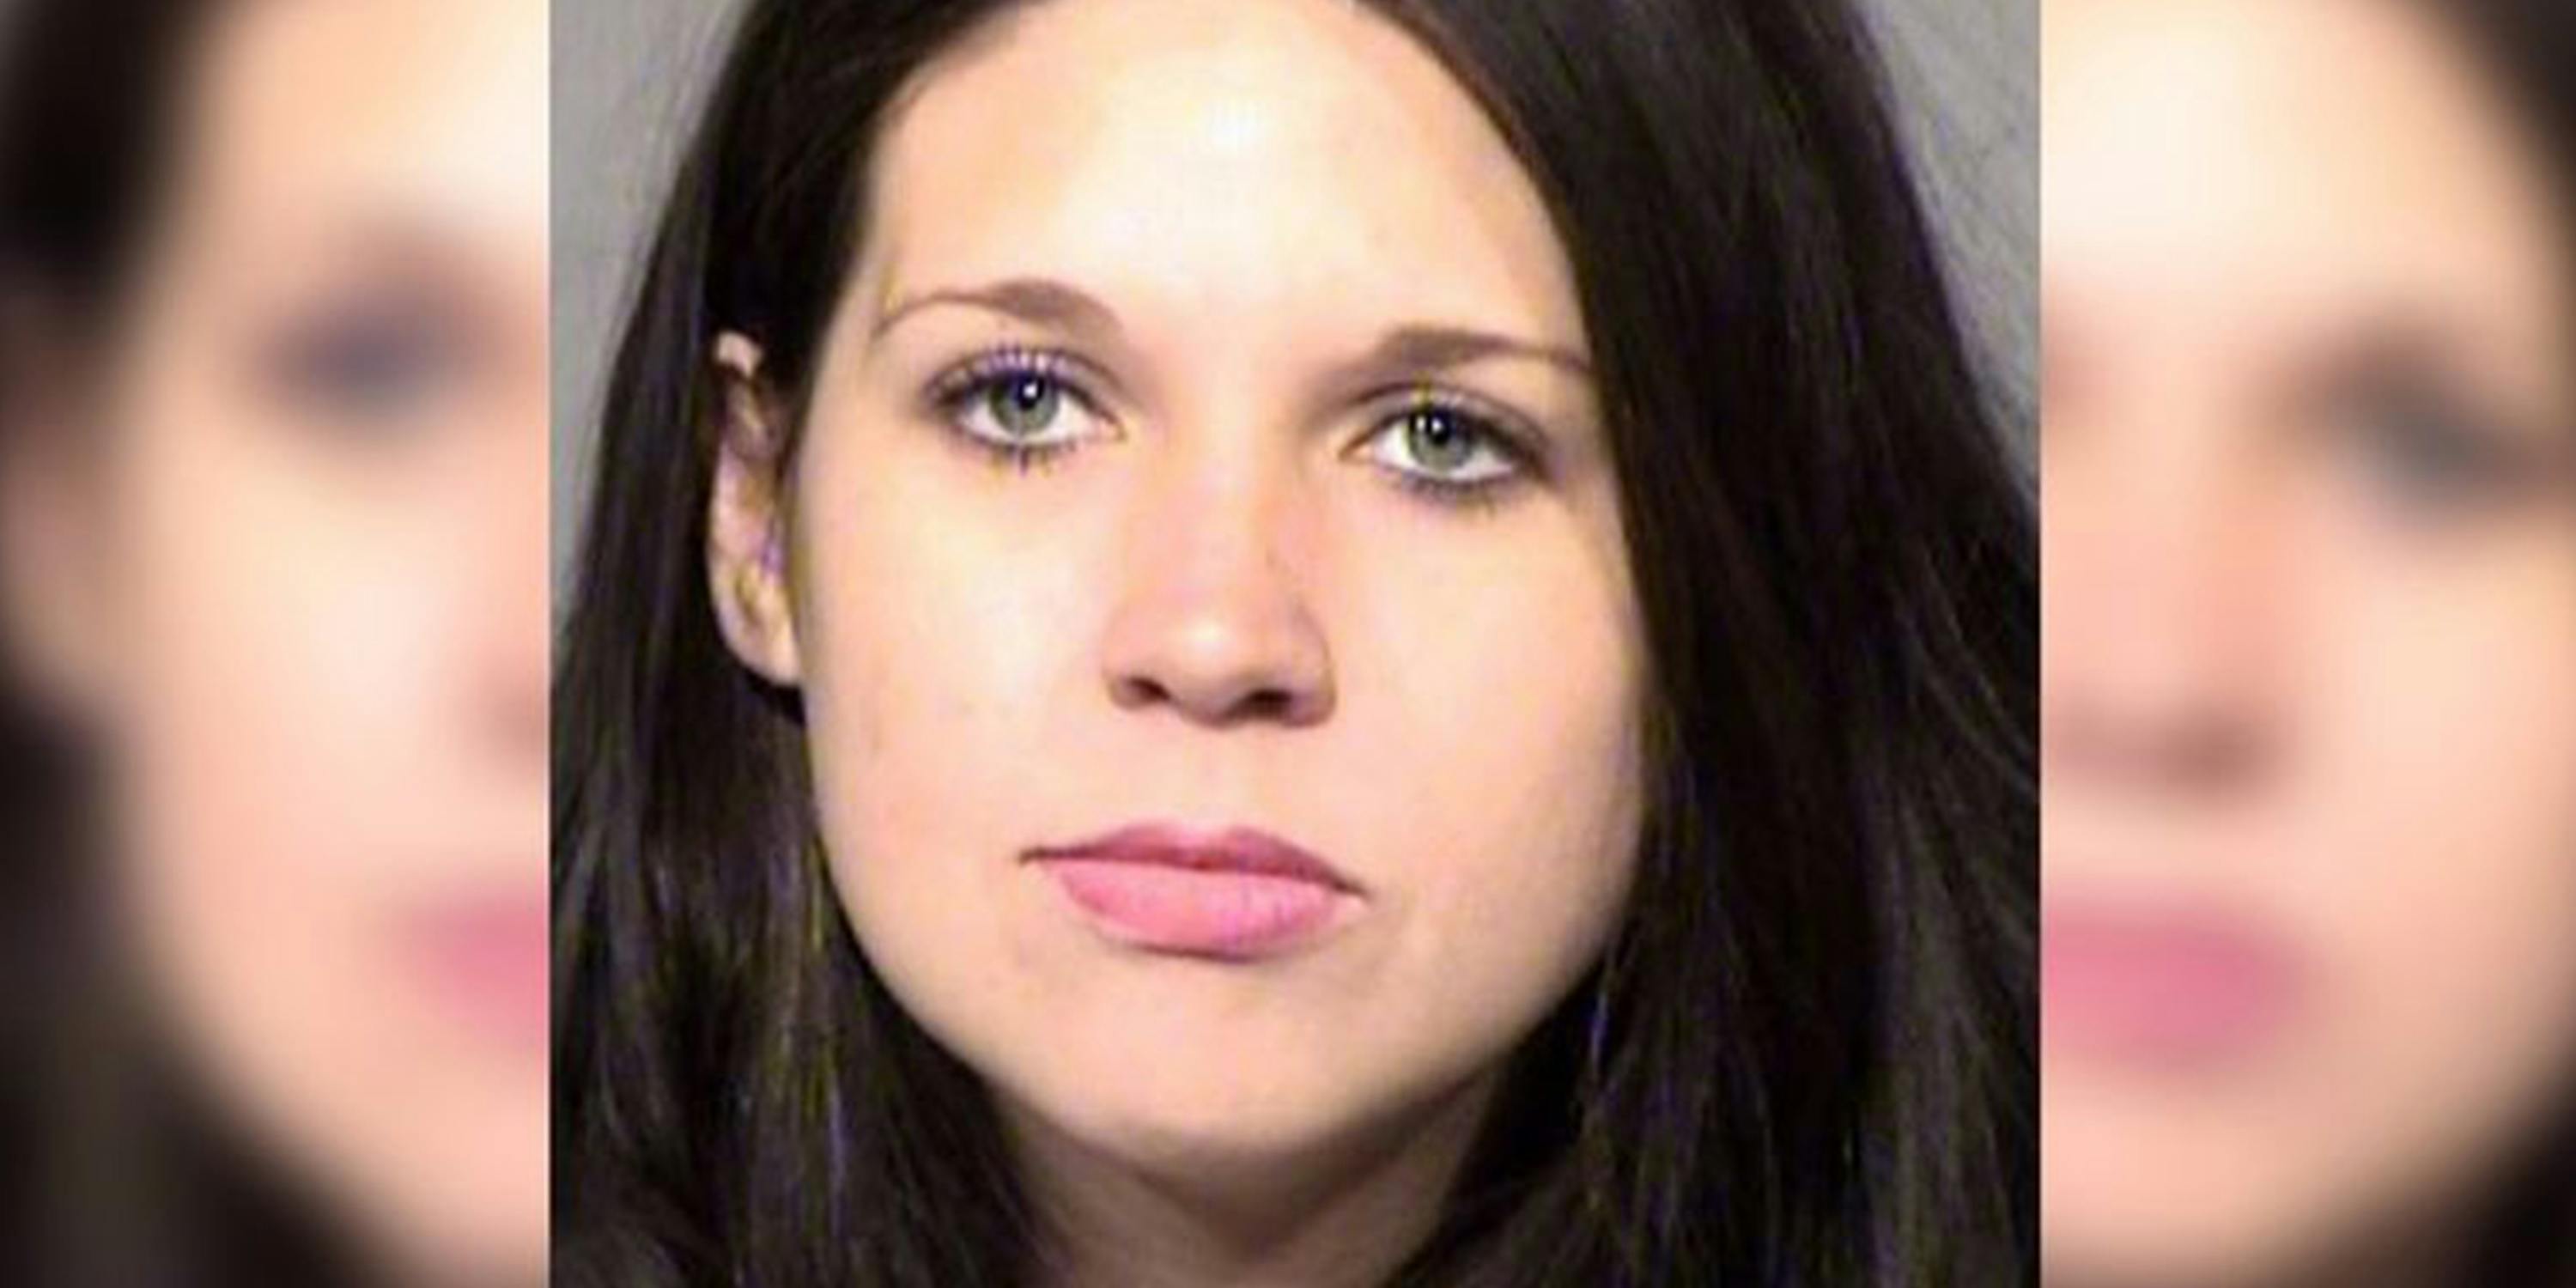 Woman arrested after child eats weed mac n cheese